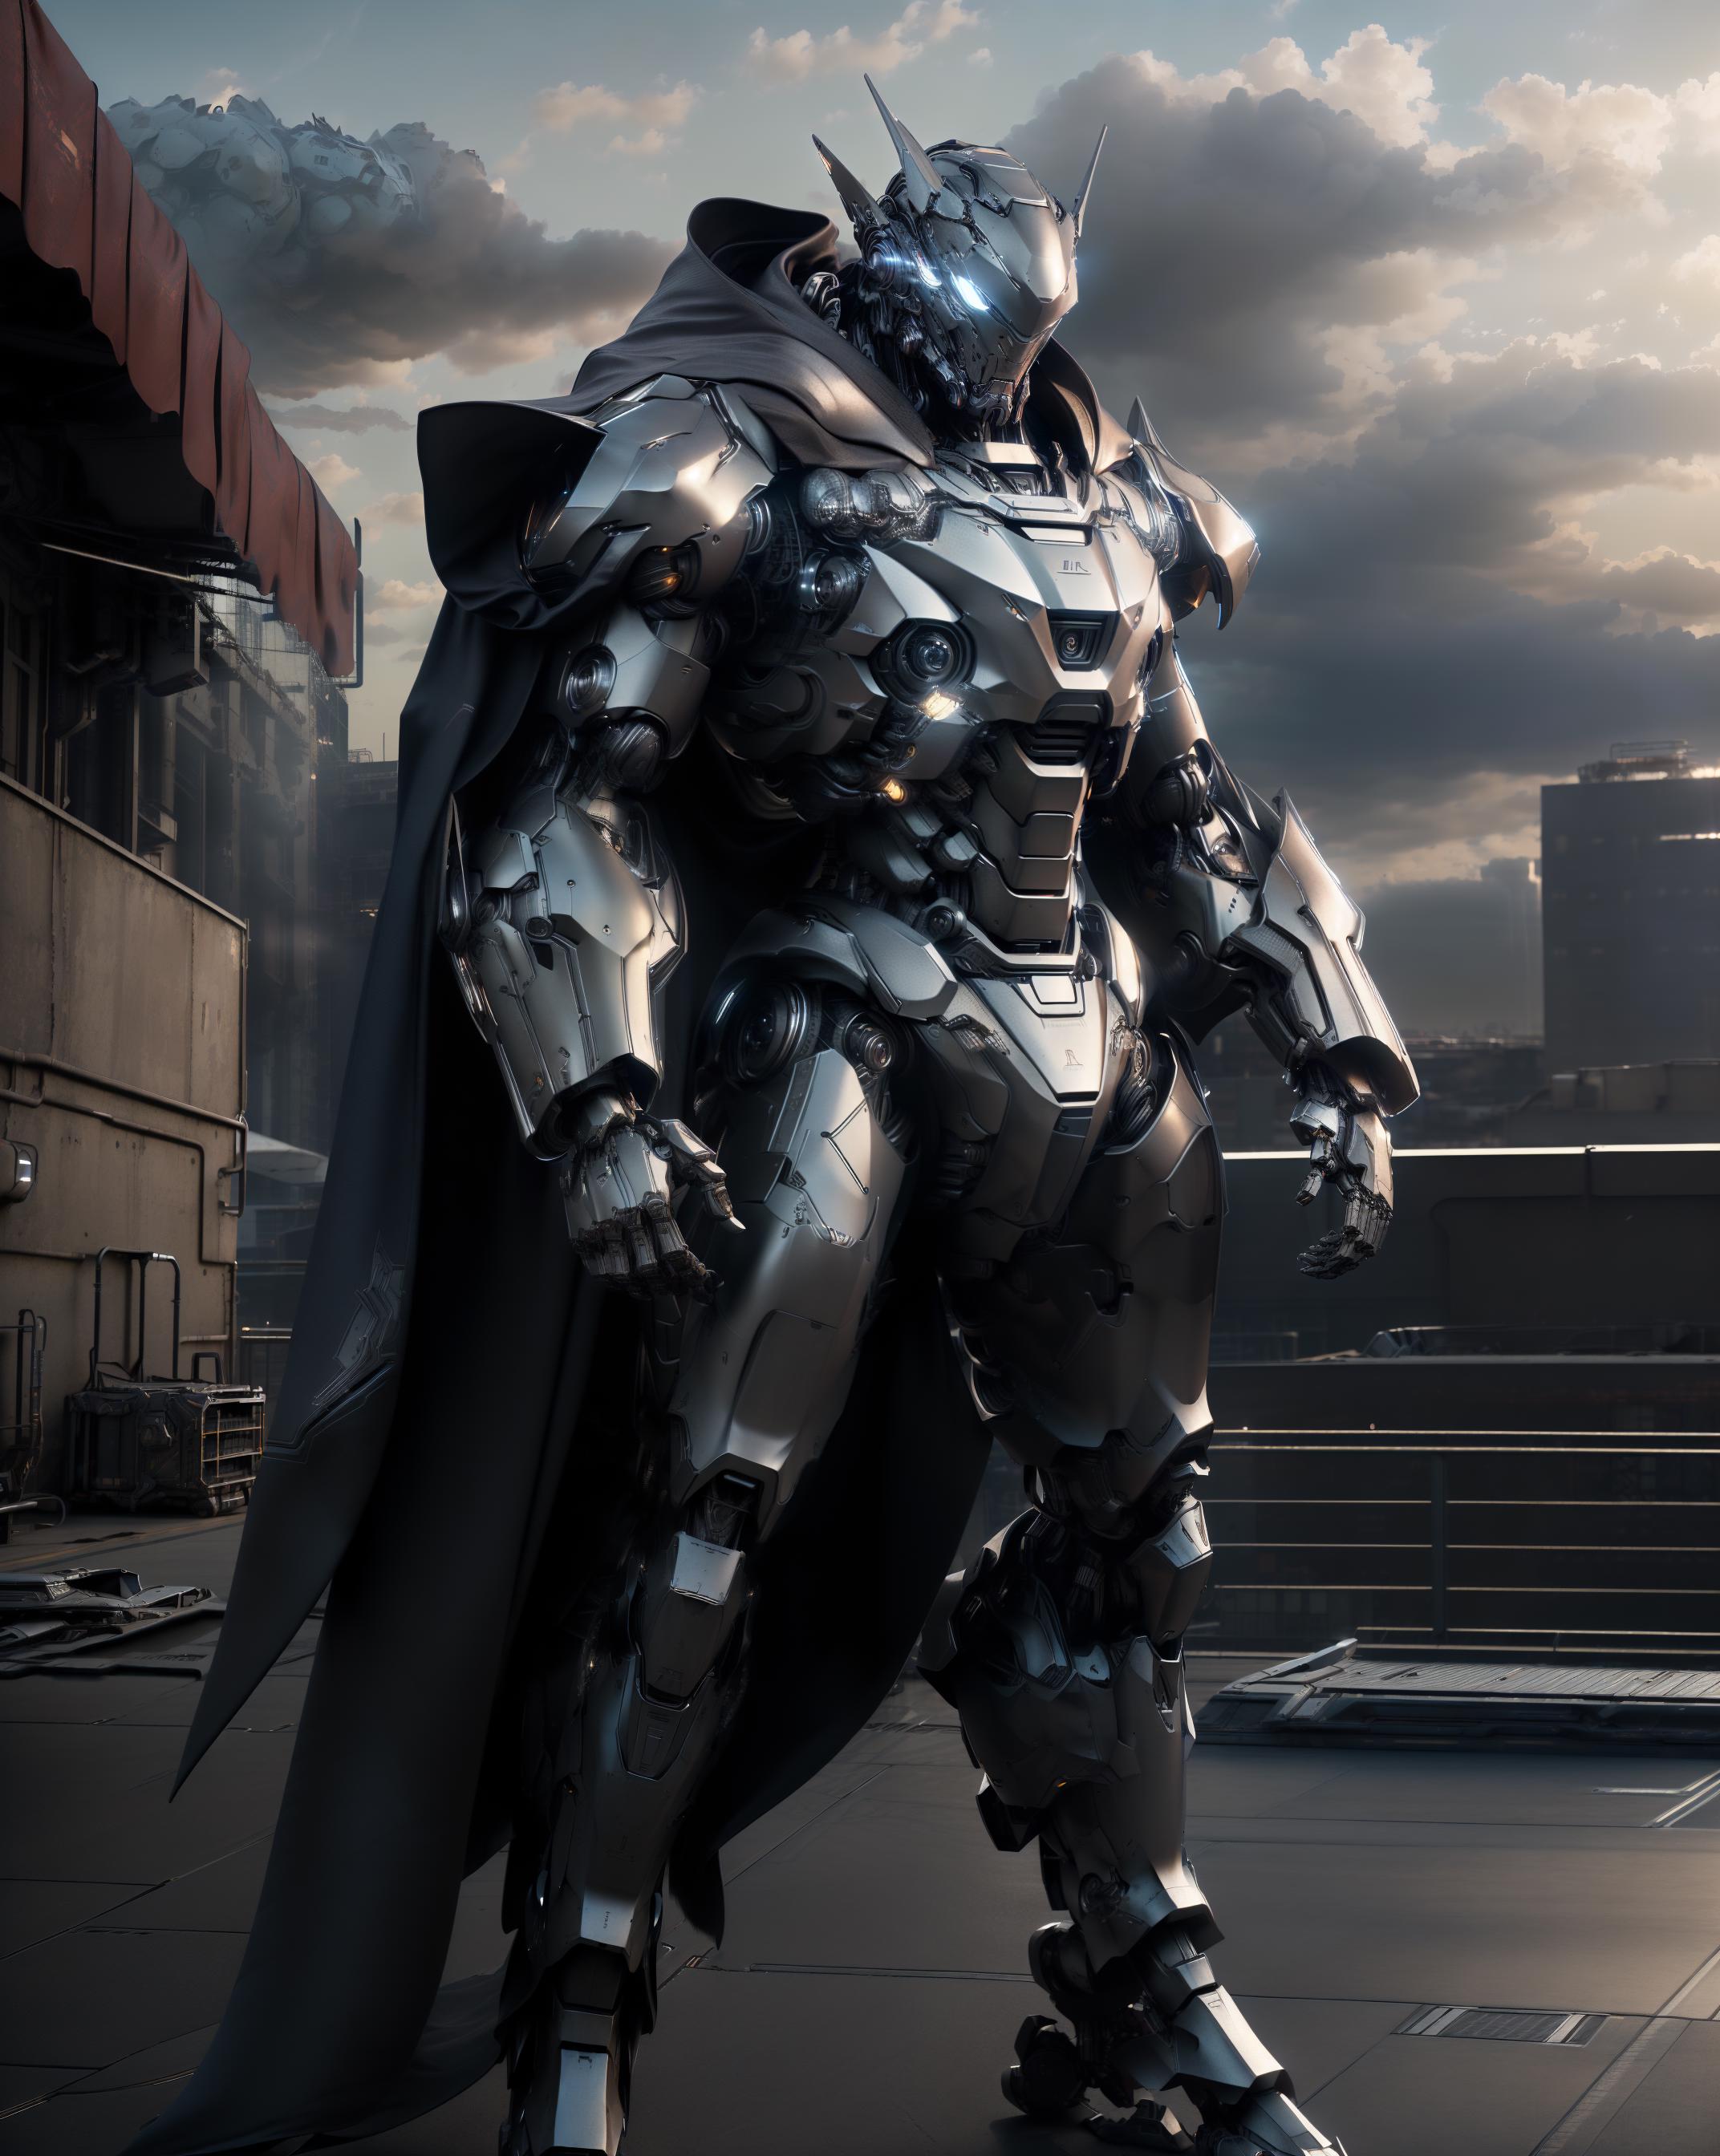 Futuristic Robot with Tall Stature and Silver Armor, Standing in an Urban Environment.